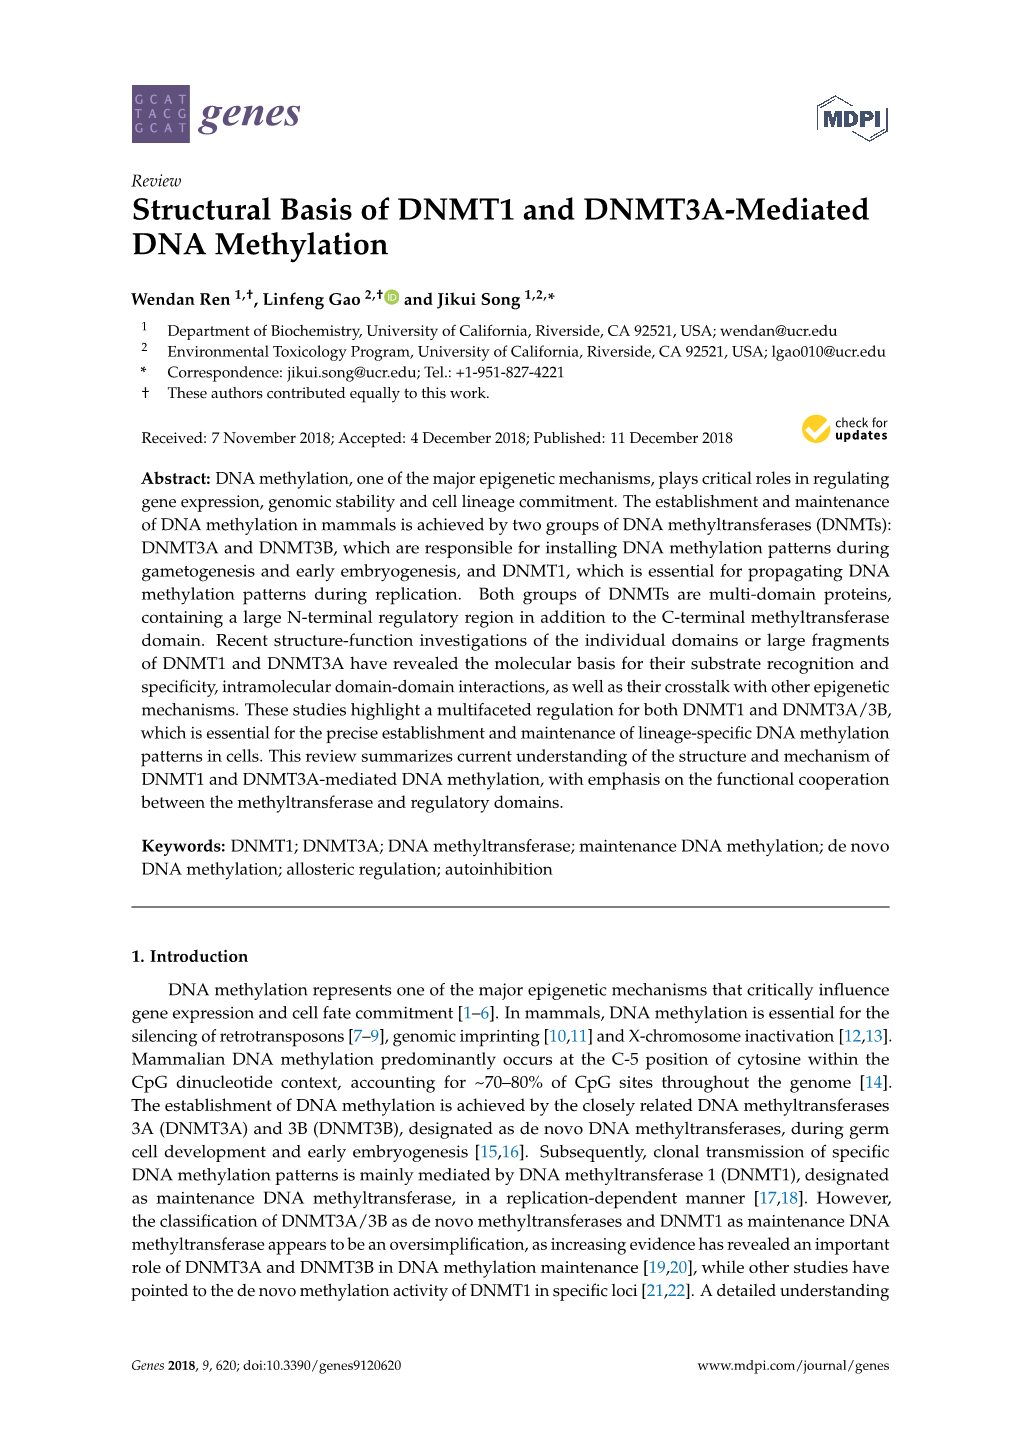 Structural Basis of DNMT1 and DNMT3A-Mediated DNA Methylation